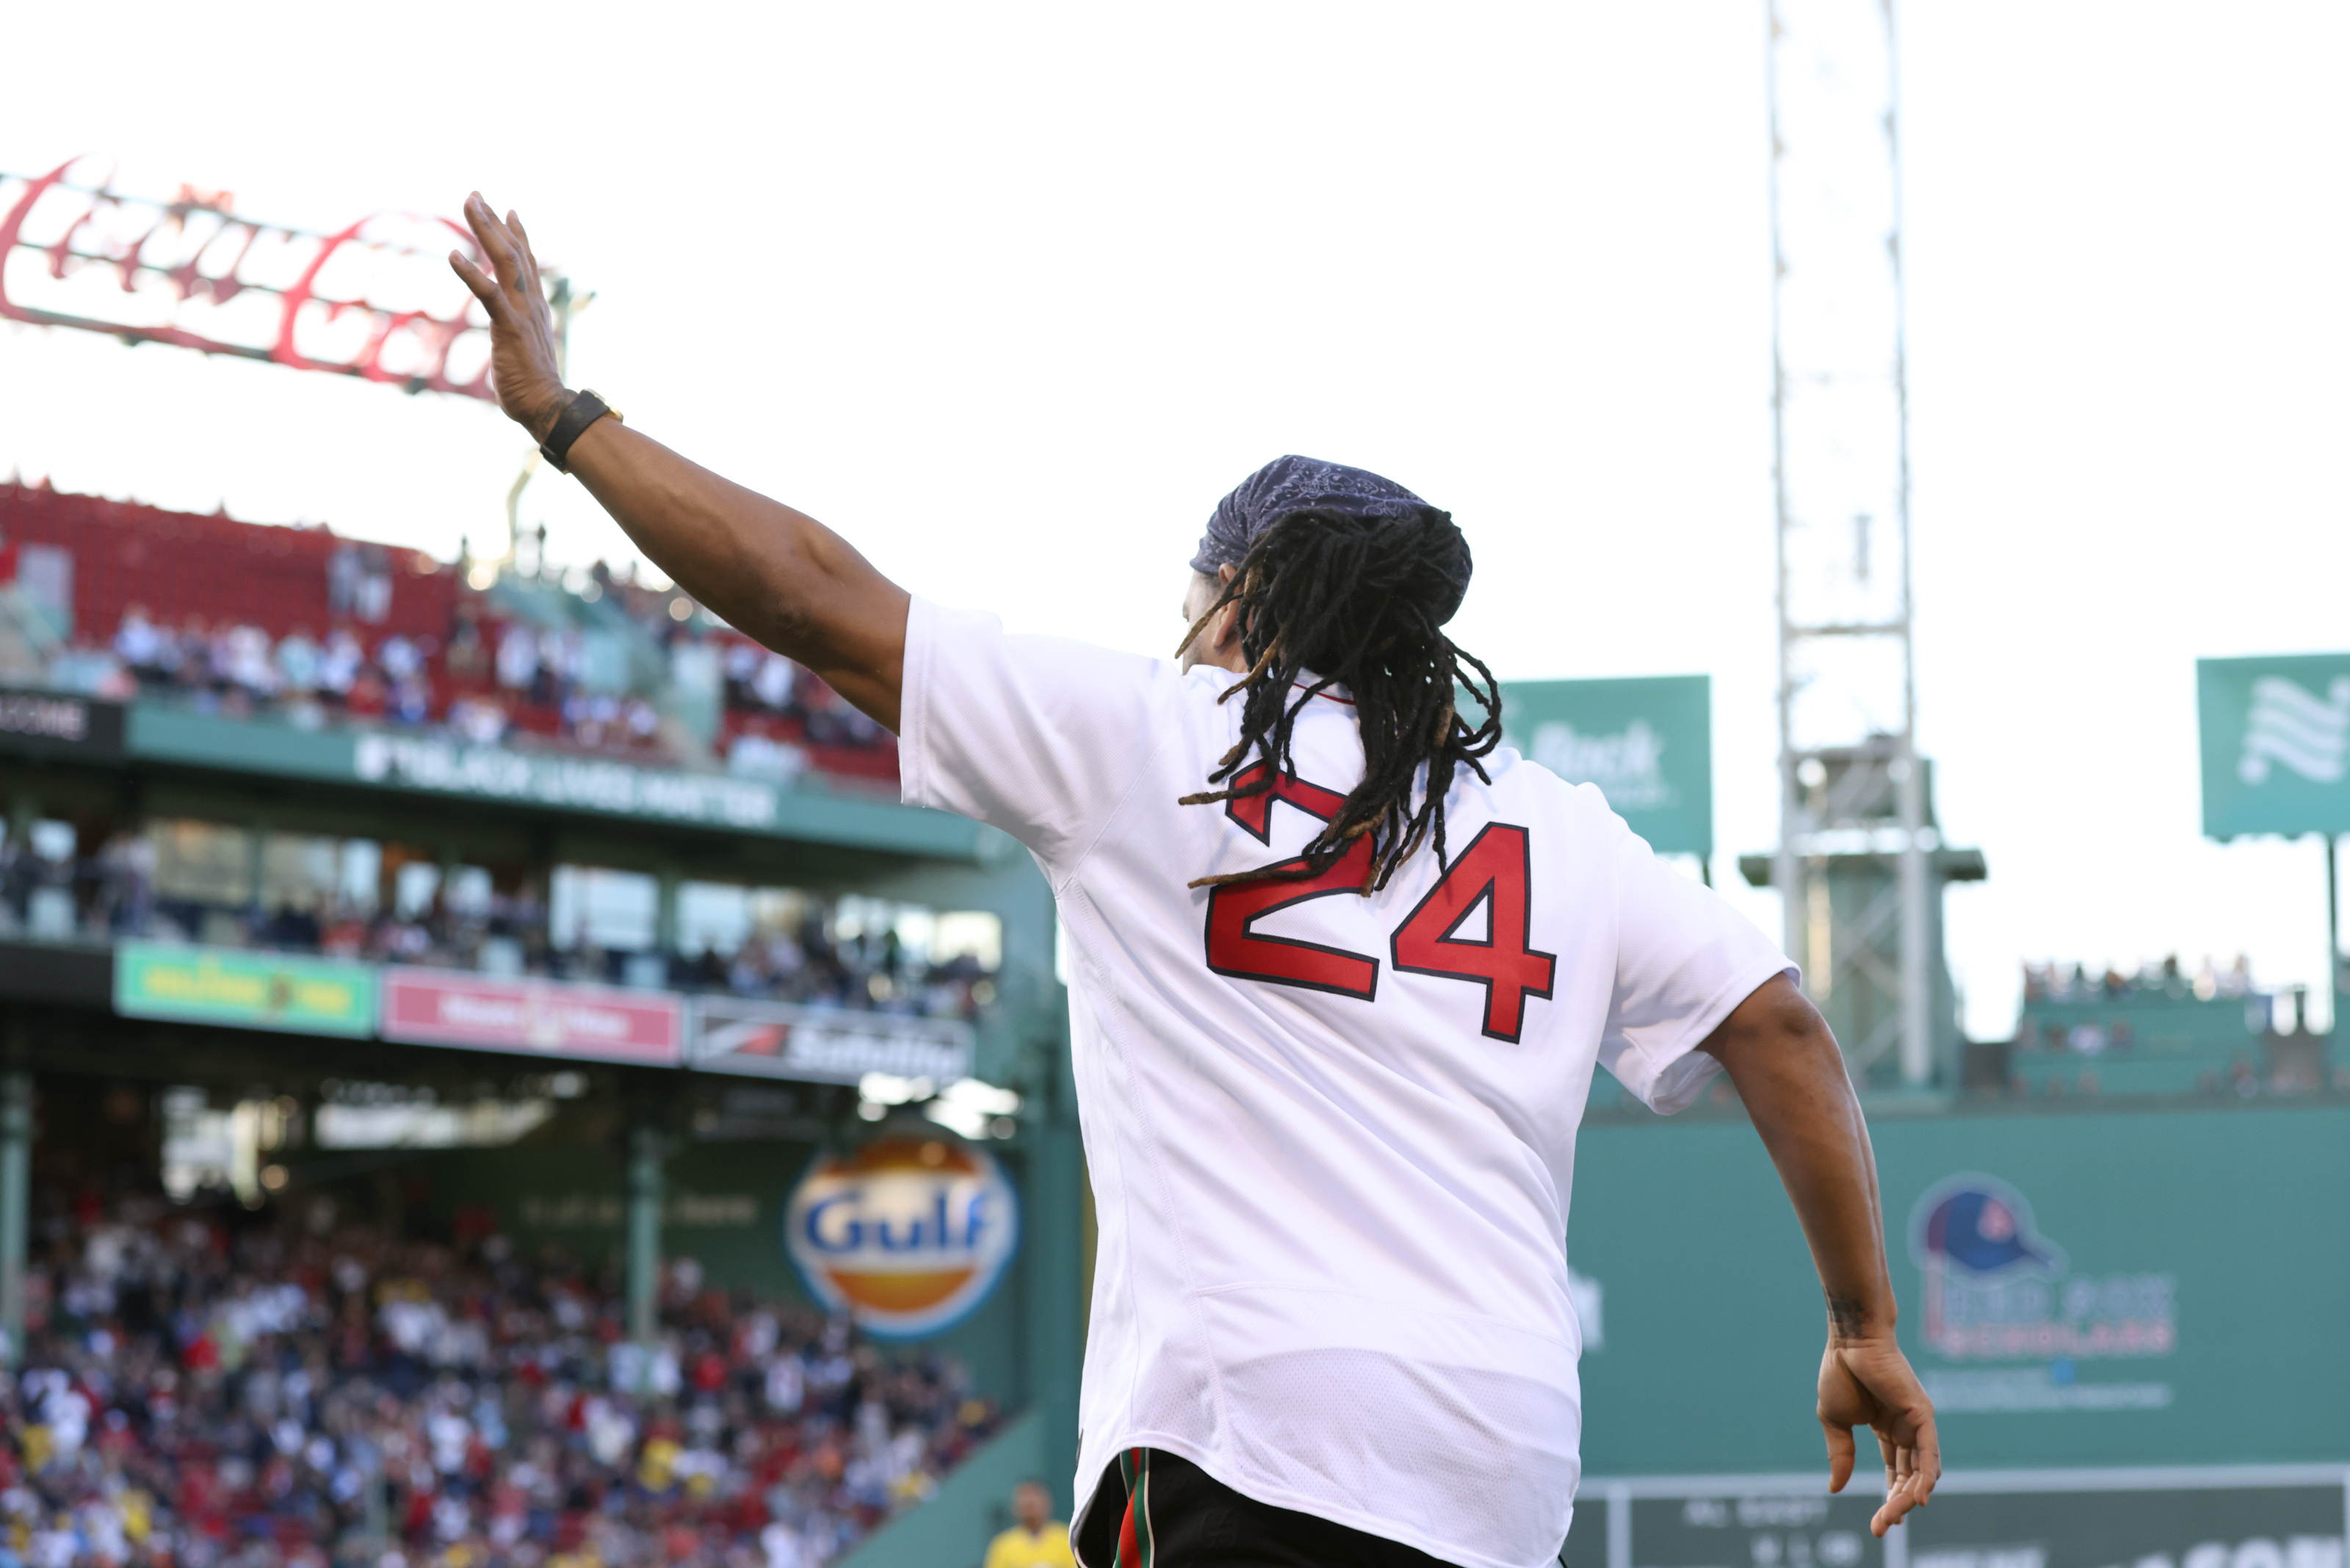 Boston Red Sox: Manny Ramirez wants to attempt a comeback